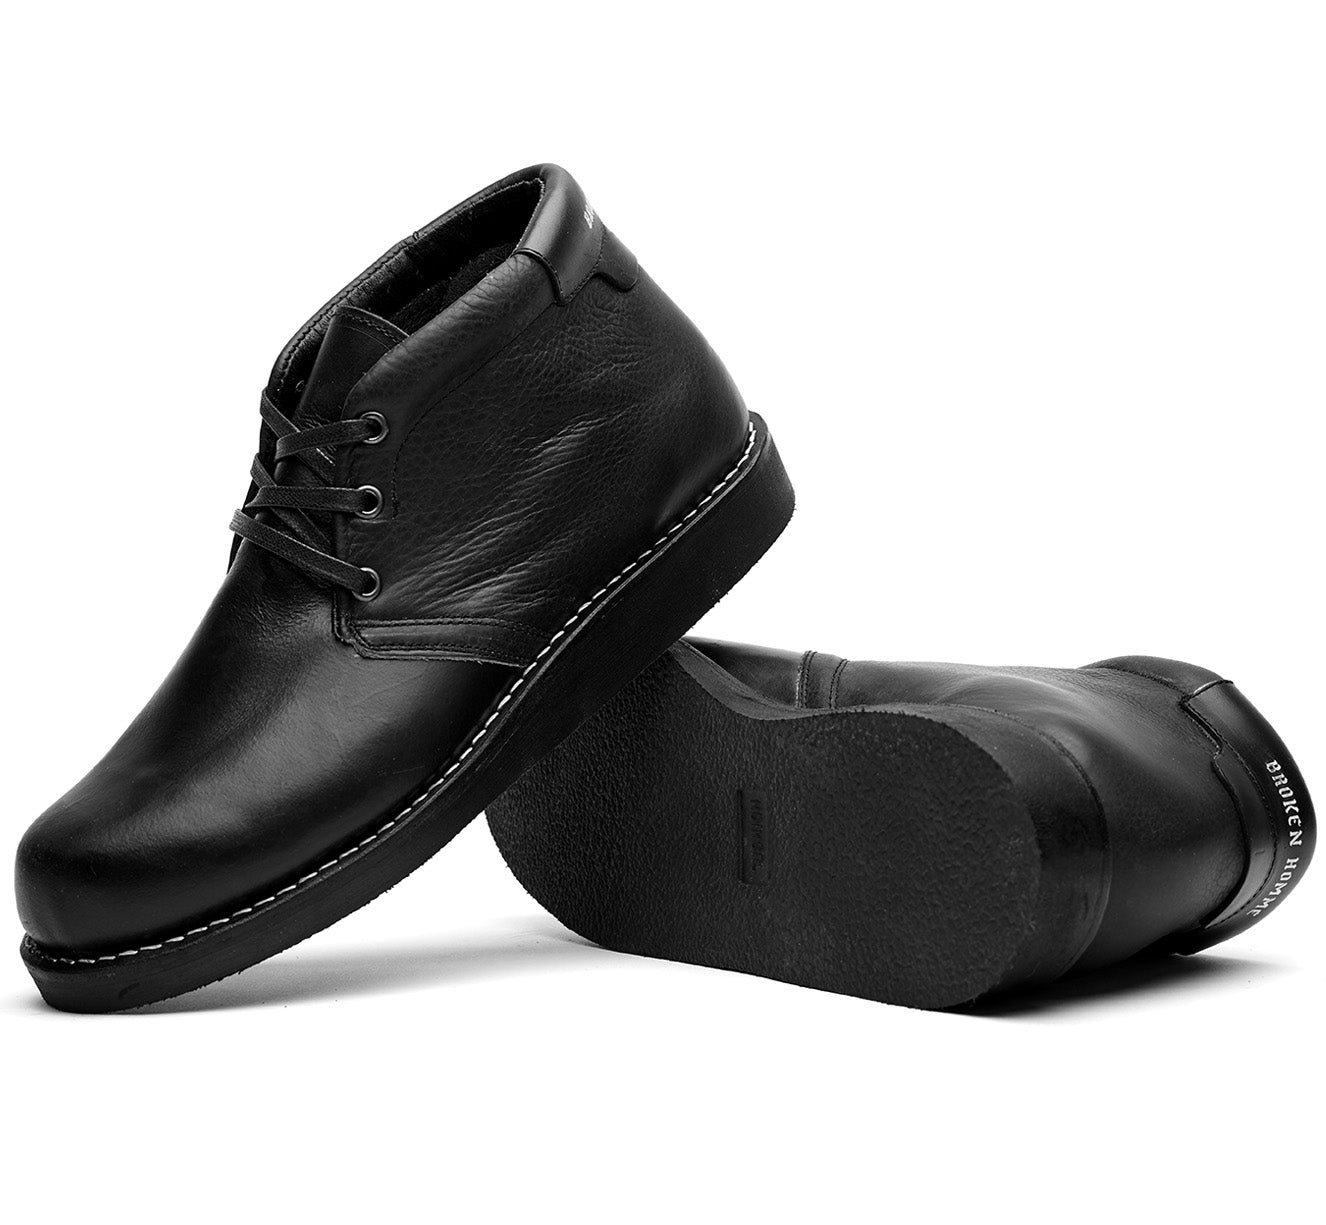 A pair of Jayson boots by Broken Homme on a white background.